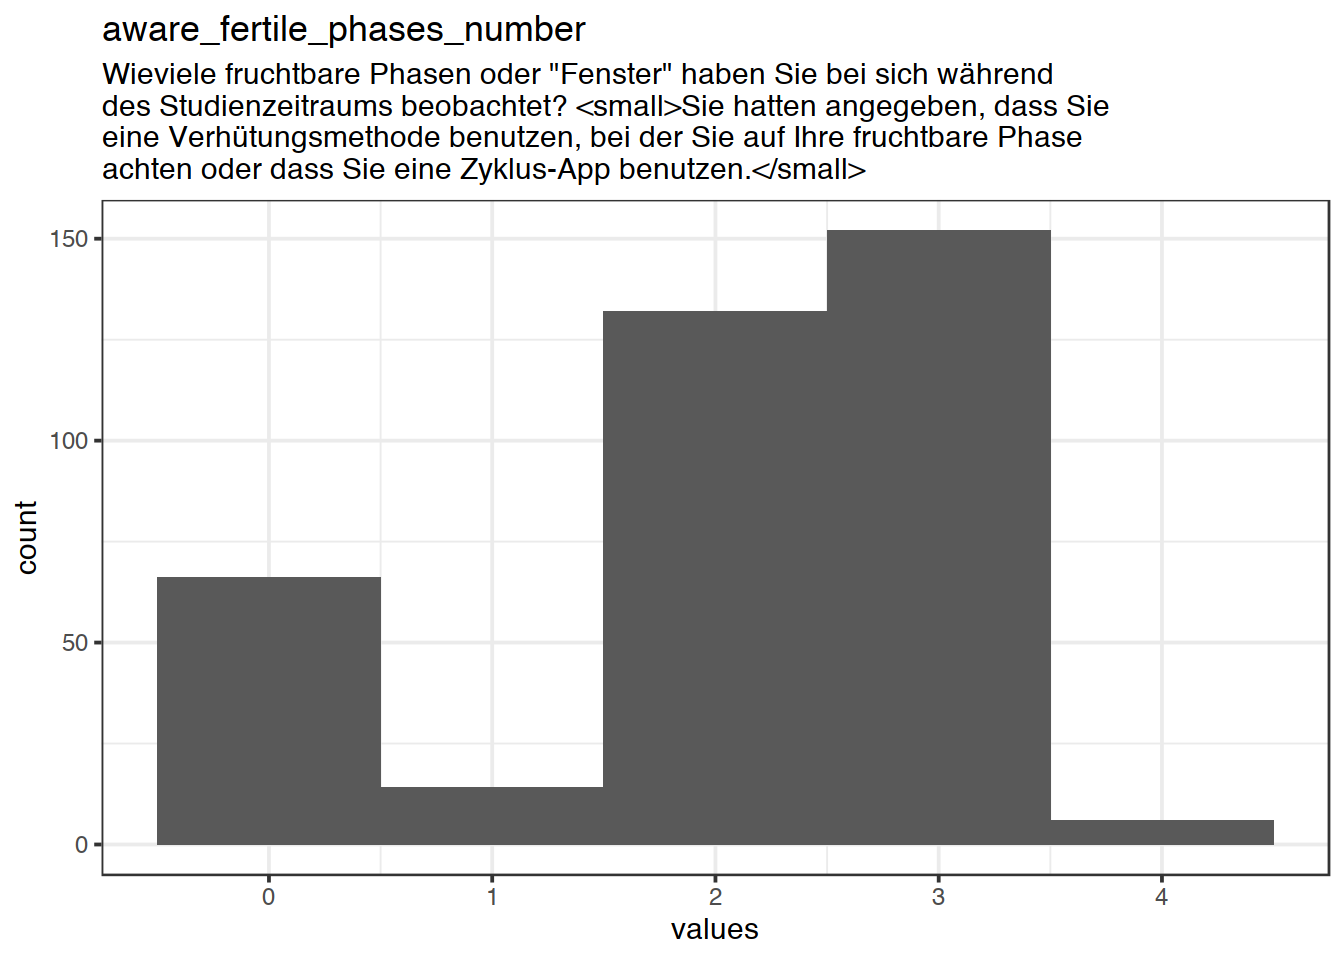 Distribution of values for aware_fertile_phases_number